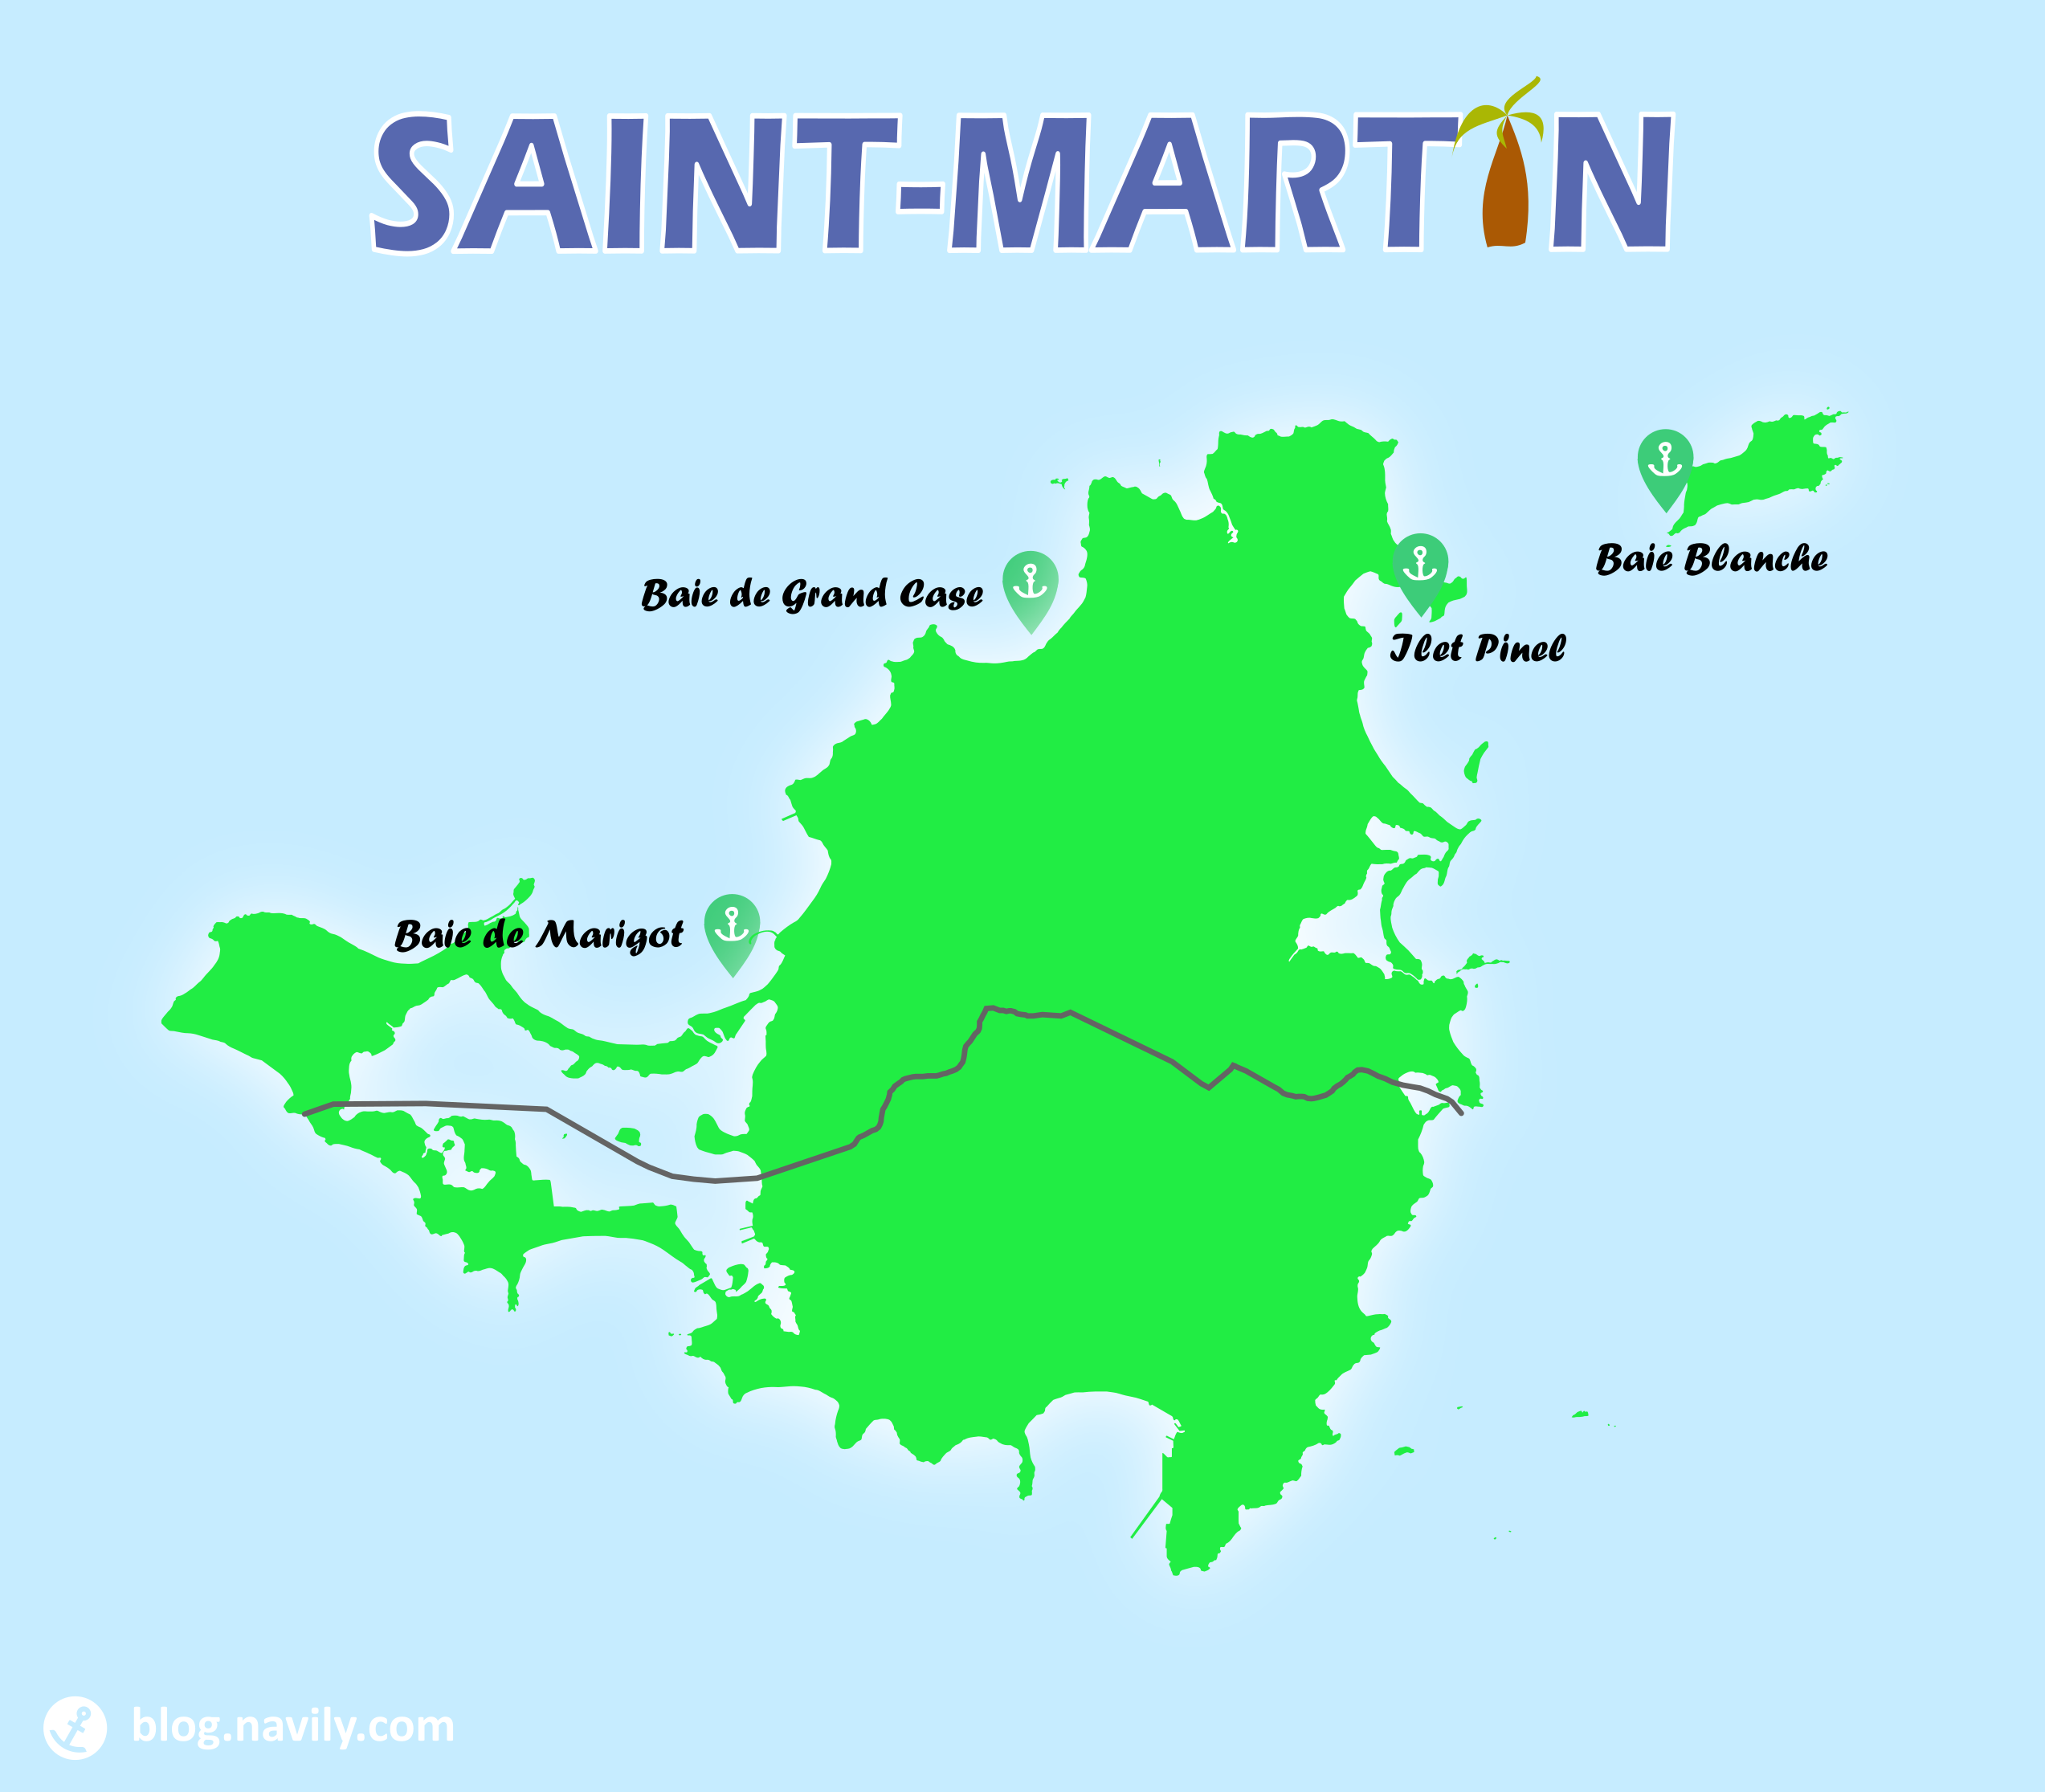 The best anchorages in Saint-Martin - Navily The Logbook